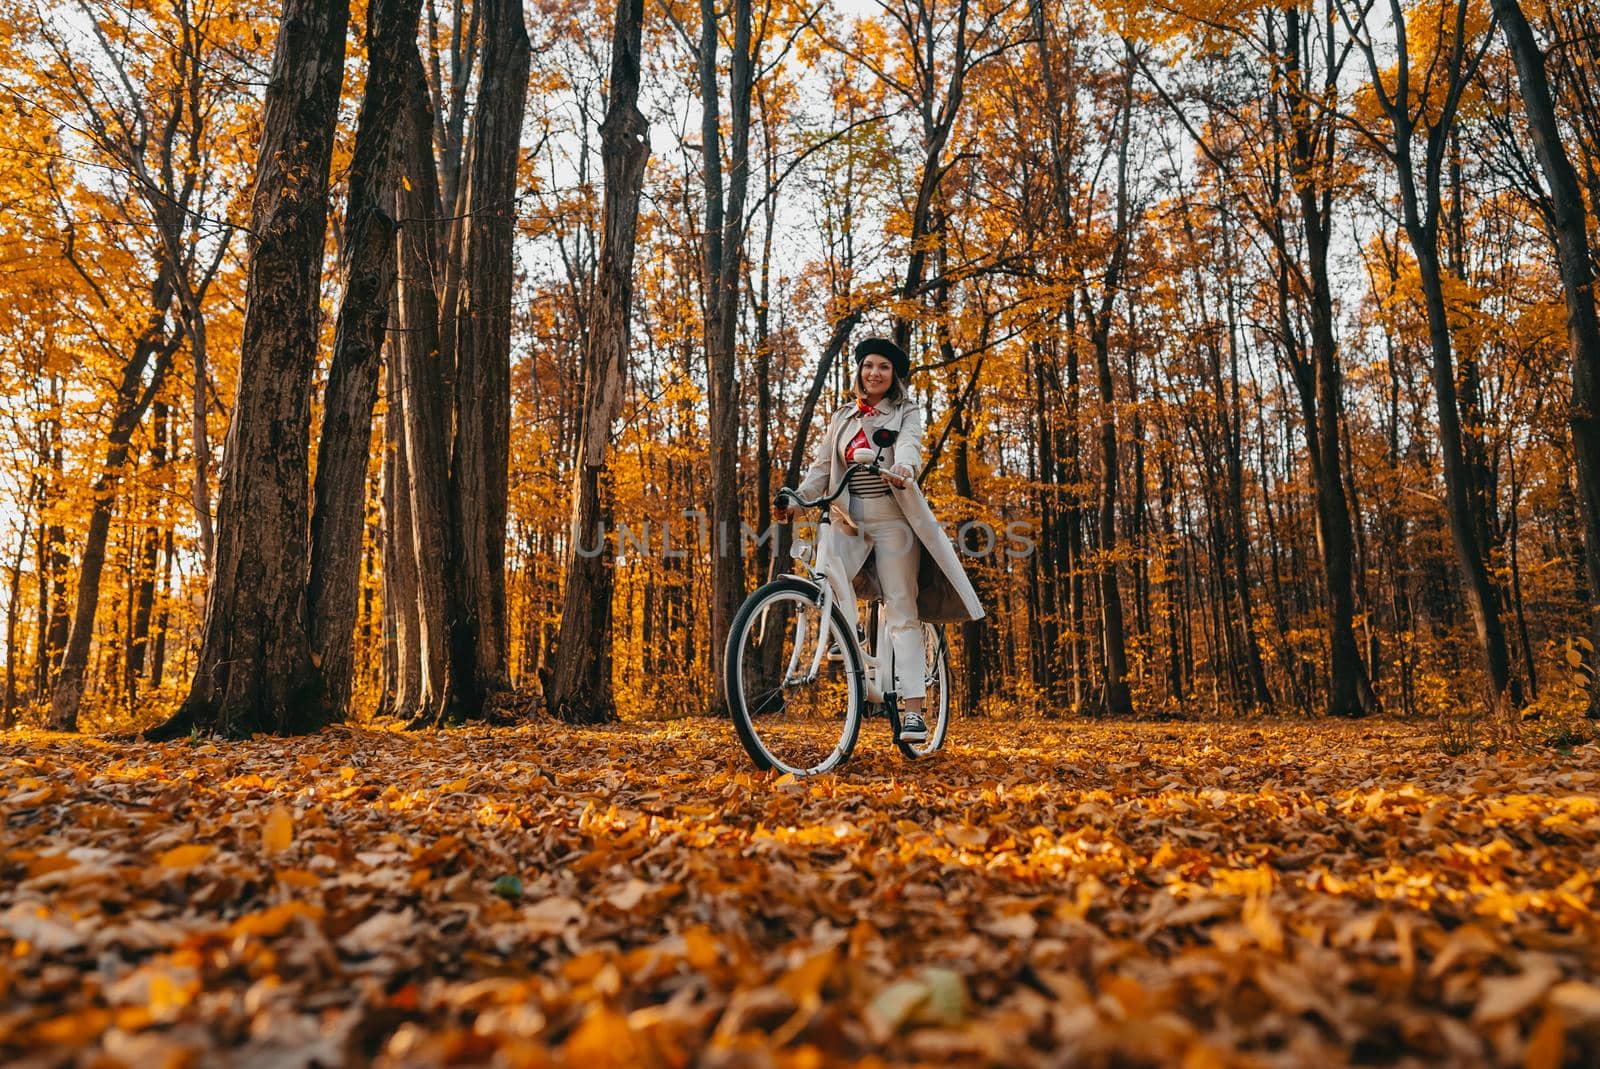 Young woman riding on retro bicycle in yellow autumn park. Amazing scene of trendy girl on nature background. Environmentally friendly mode of transport. High quality photo